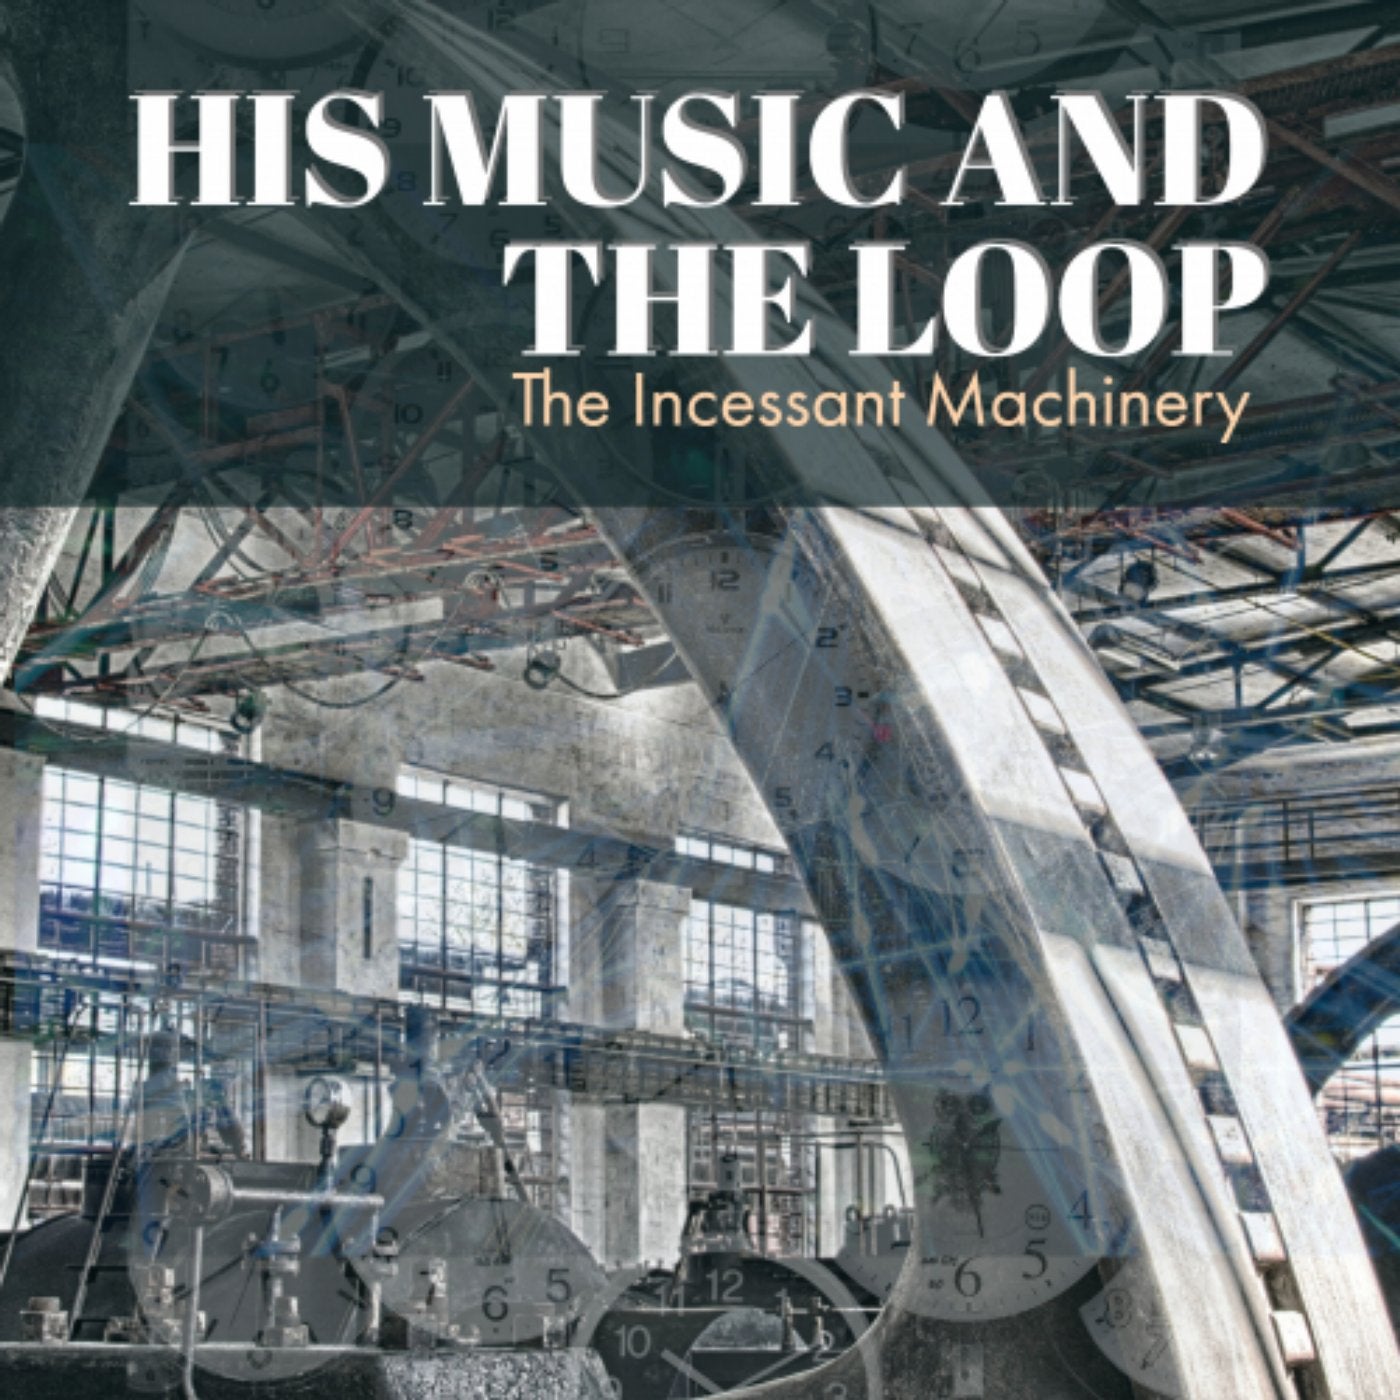 The Incessant Machinery